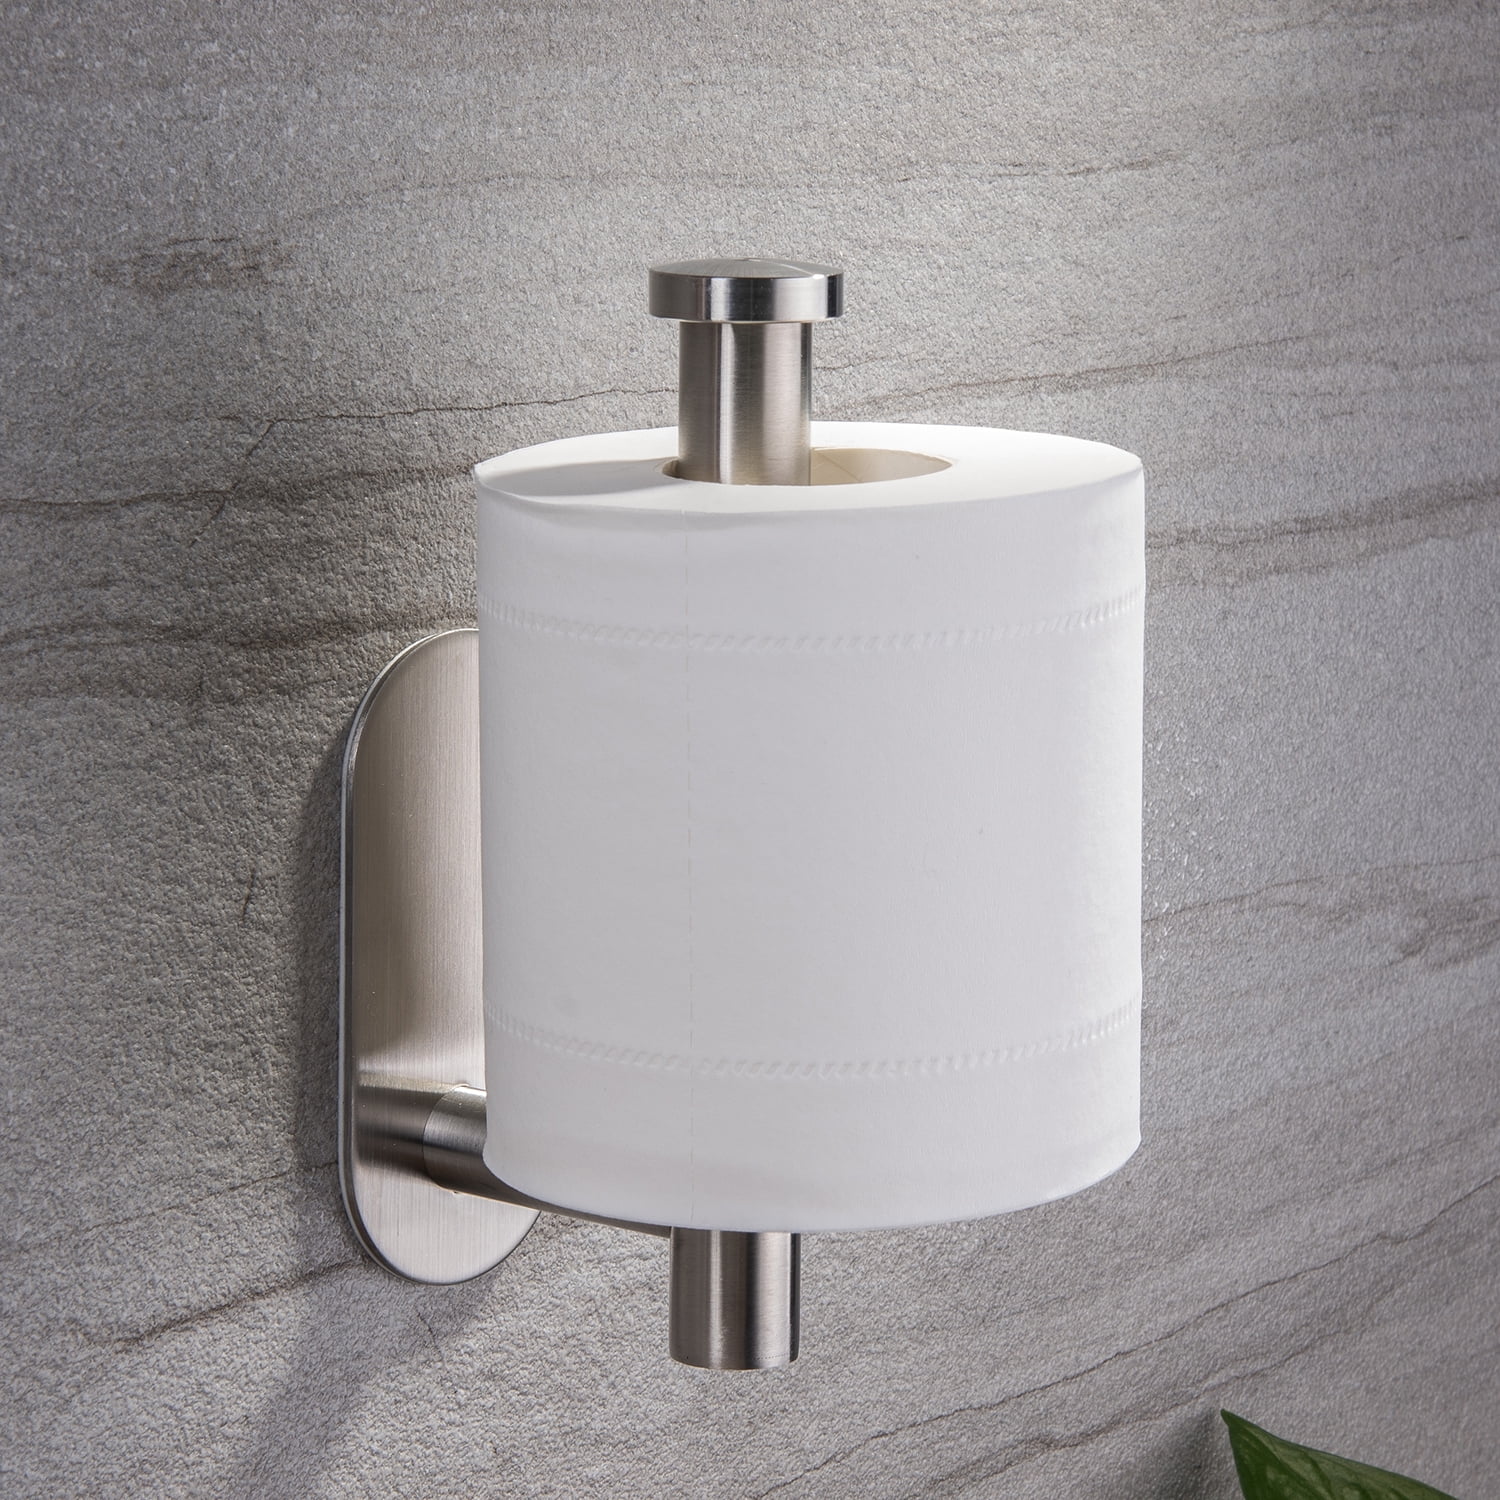 Bathroom Wall Mounted Stainless Steel Toilet Paper Holder for